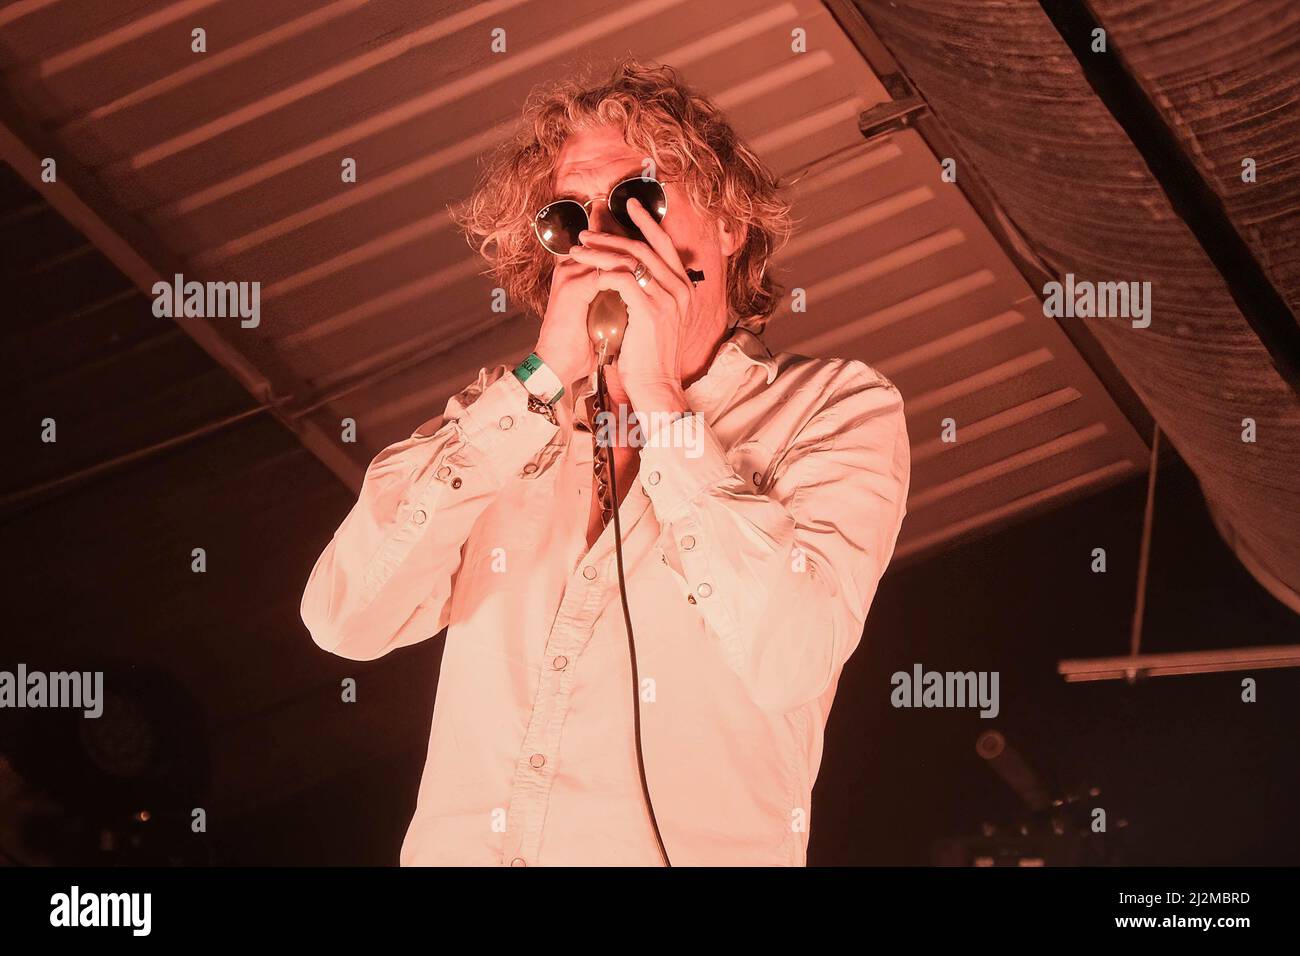 Nick Reynolds, aka Harpo Strangelove harmonica player, singer, UK's foremost creator of Death Masks and son of Great Train Robber Bruce Reynolds  with the British acid country band Alabama 3, known as A3 in the United States performing live on stage at the Engine Rooms Southampton. Stock Photo